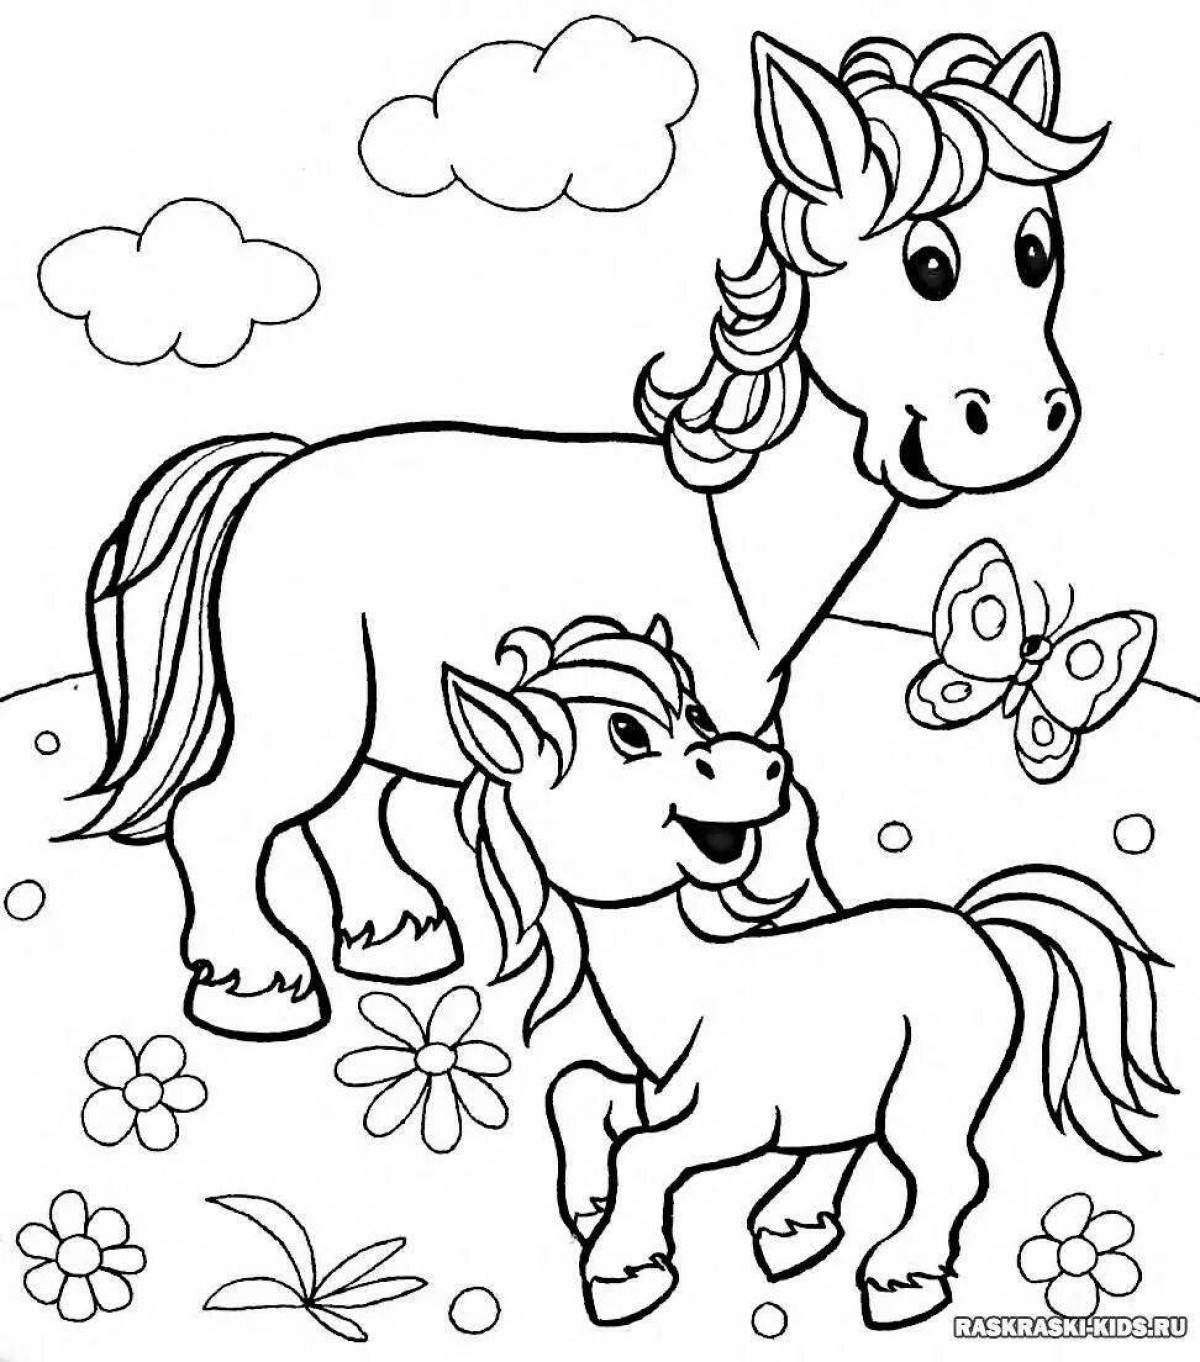 Sparkling coloring pages animals and their babies for kids